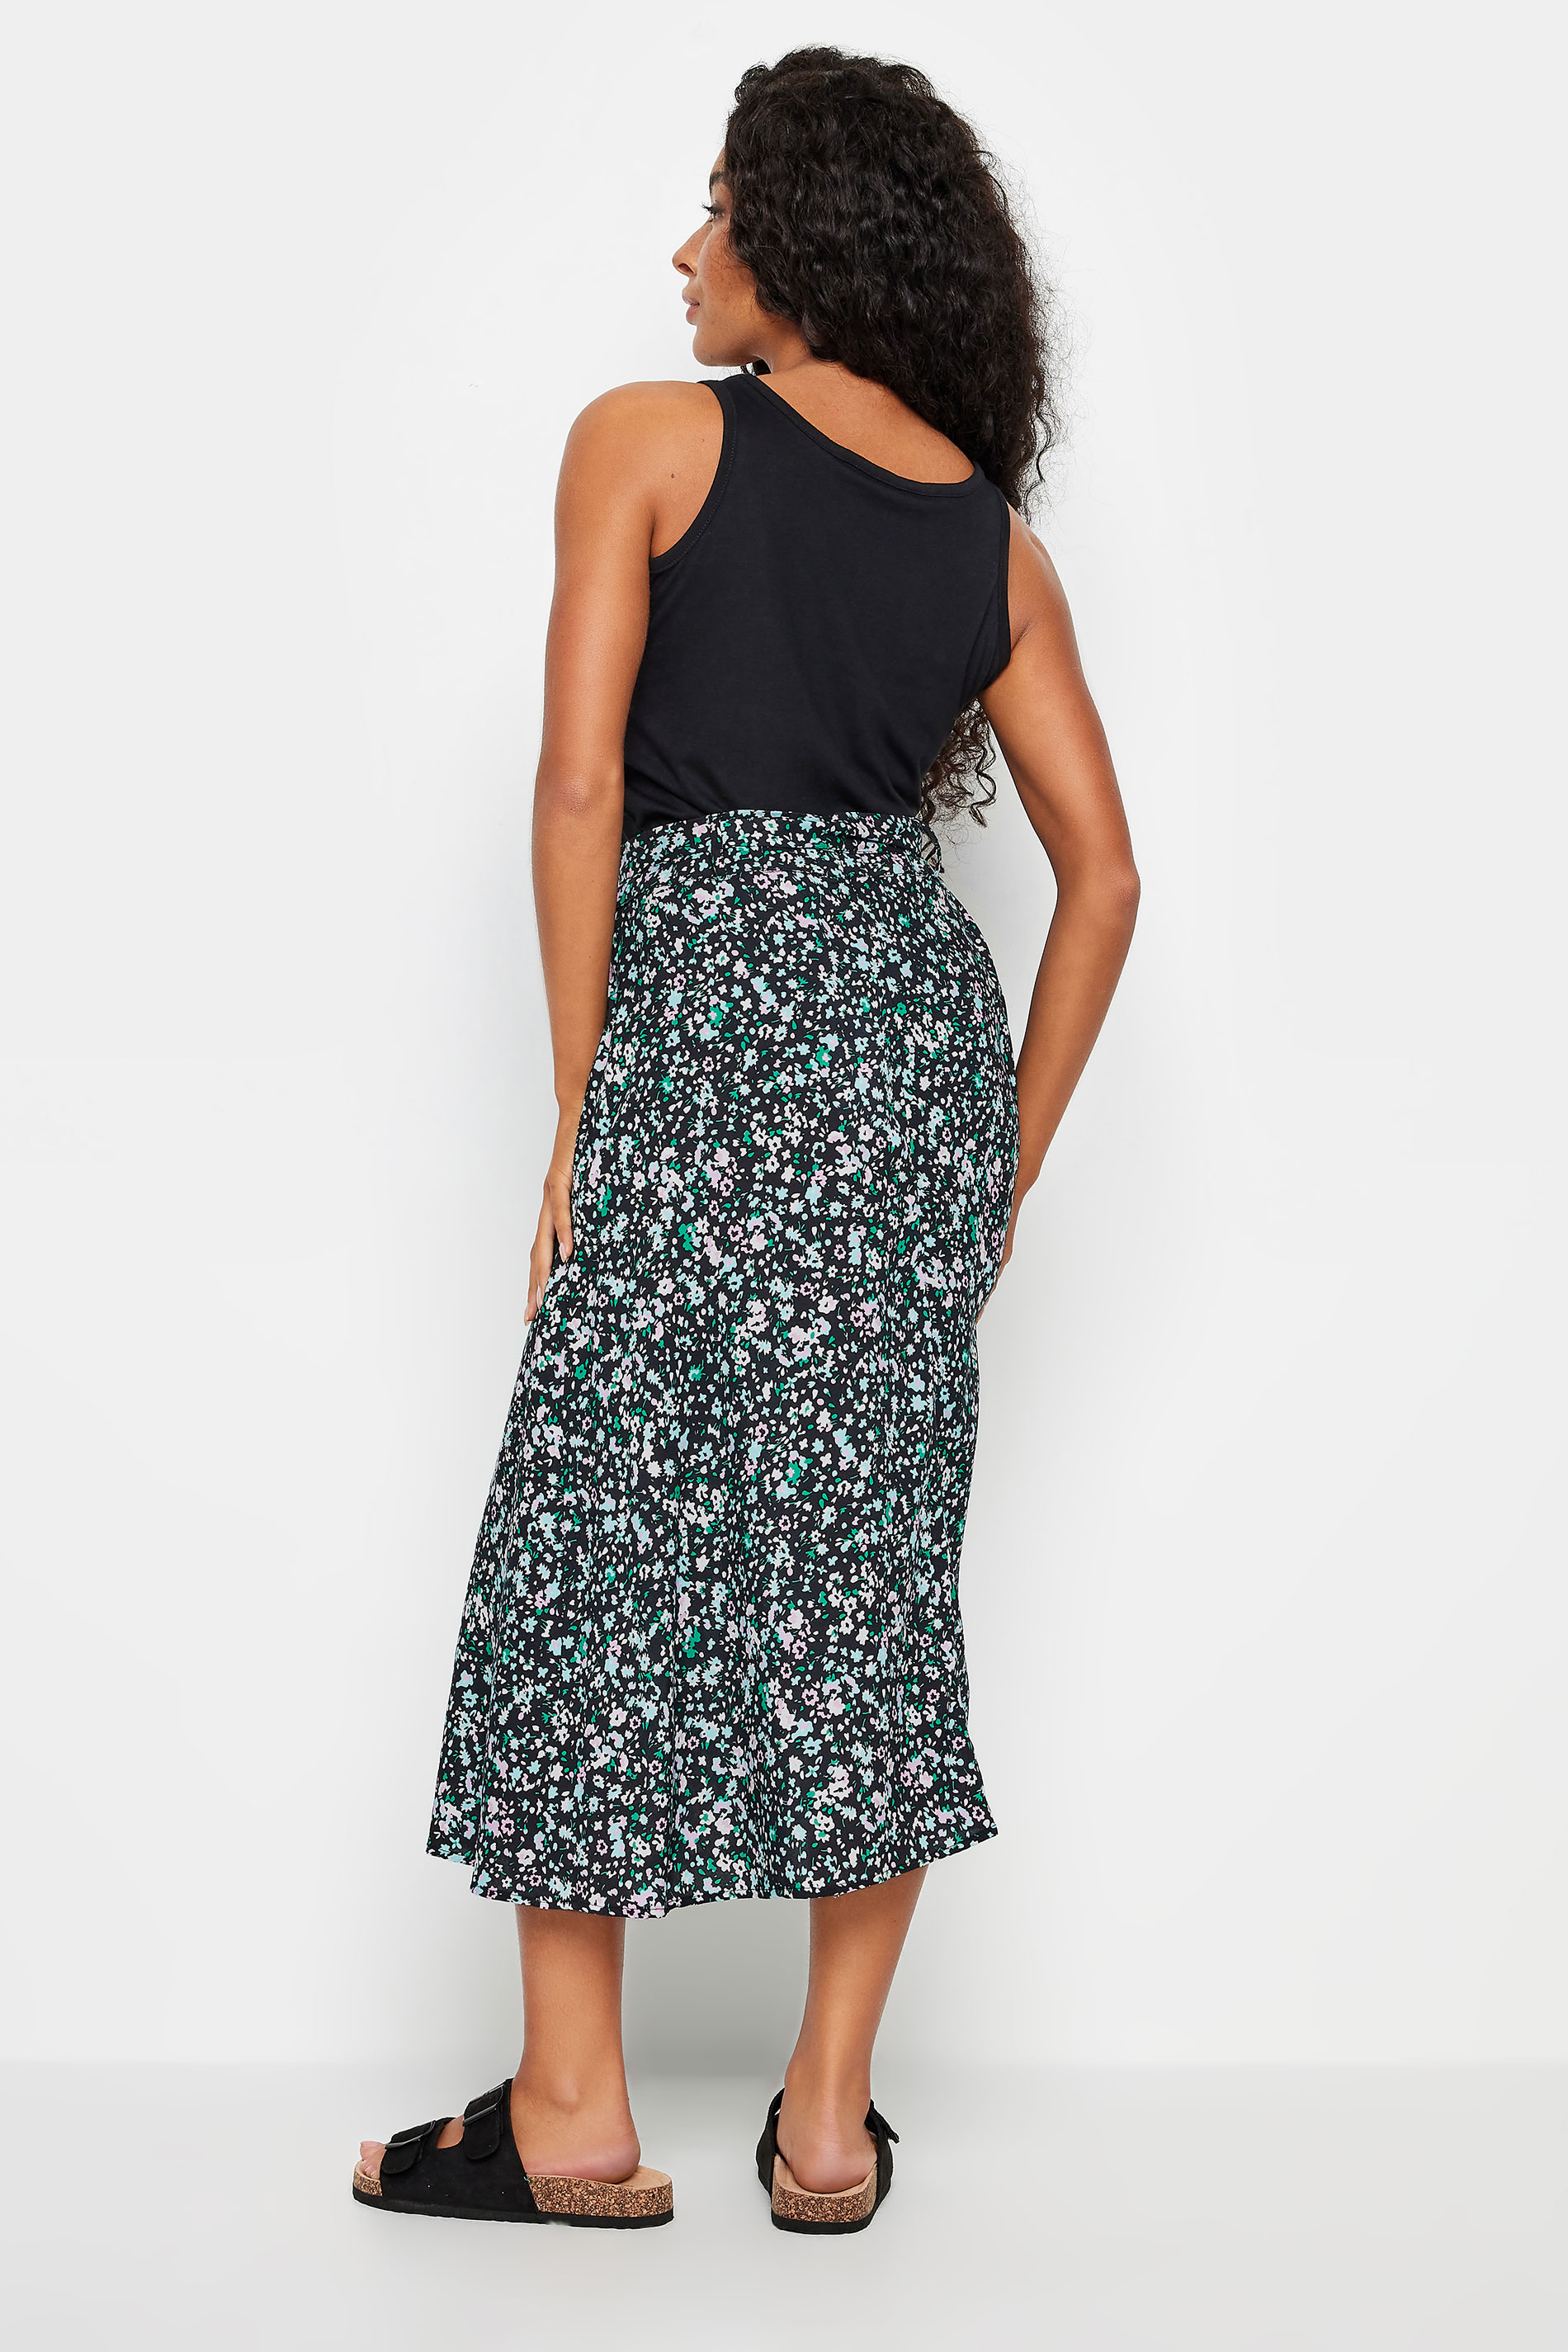 M&Co Petite Black Ditsy Floral Print Belted Midi Skirt | M&Co 3